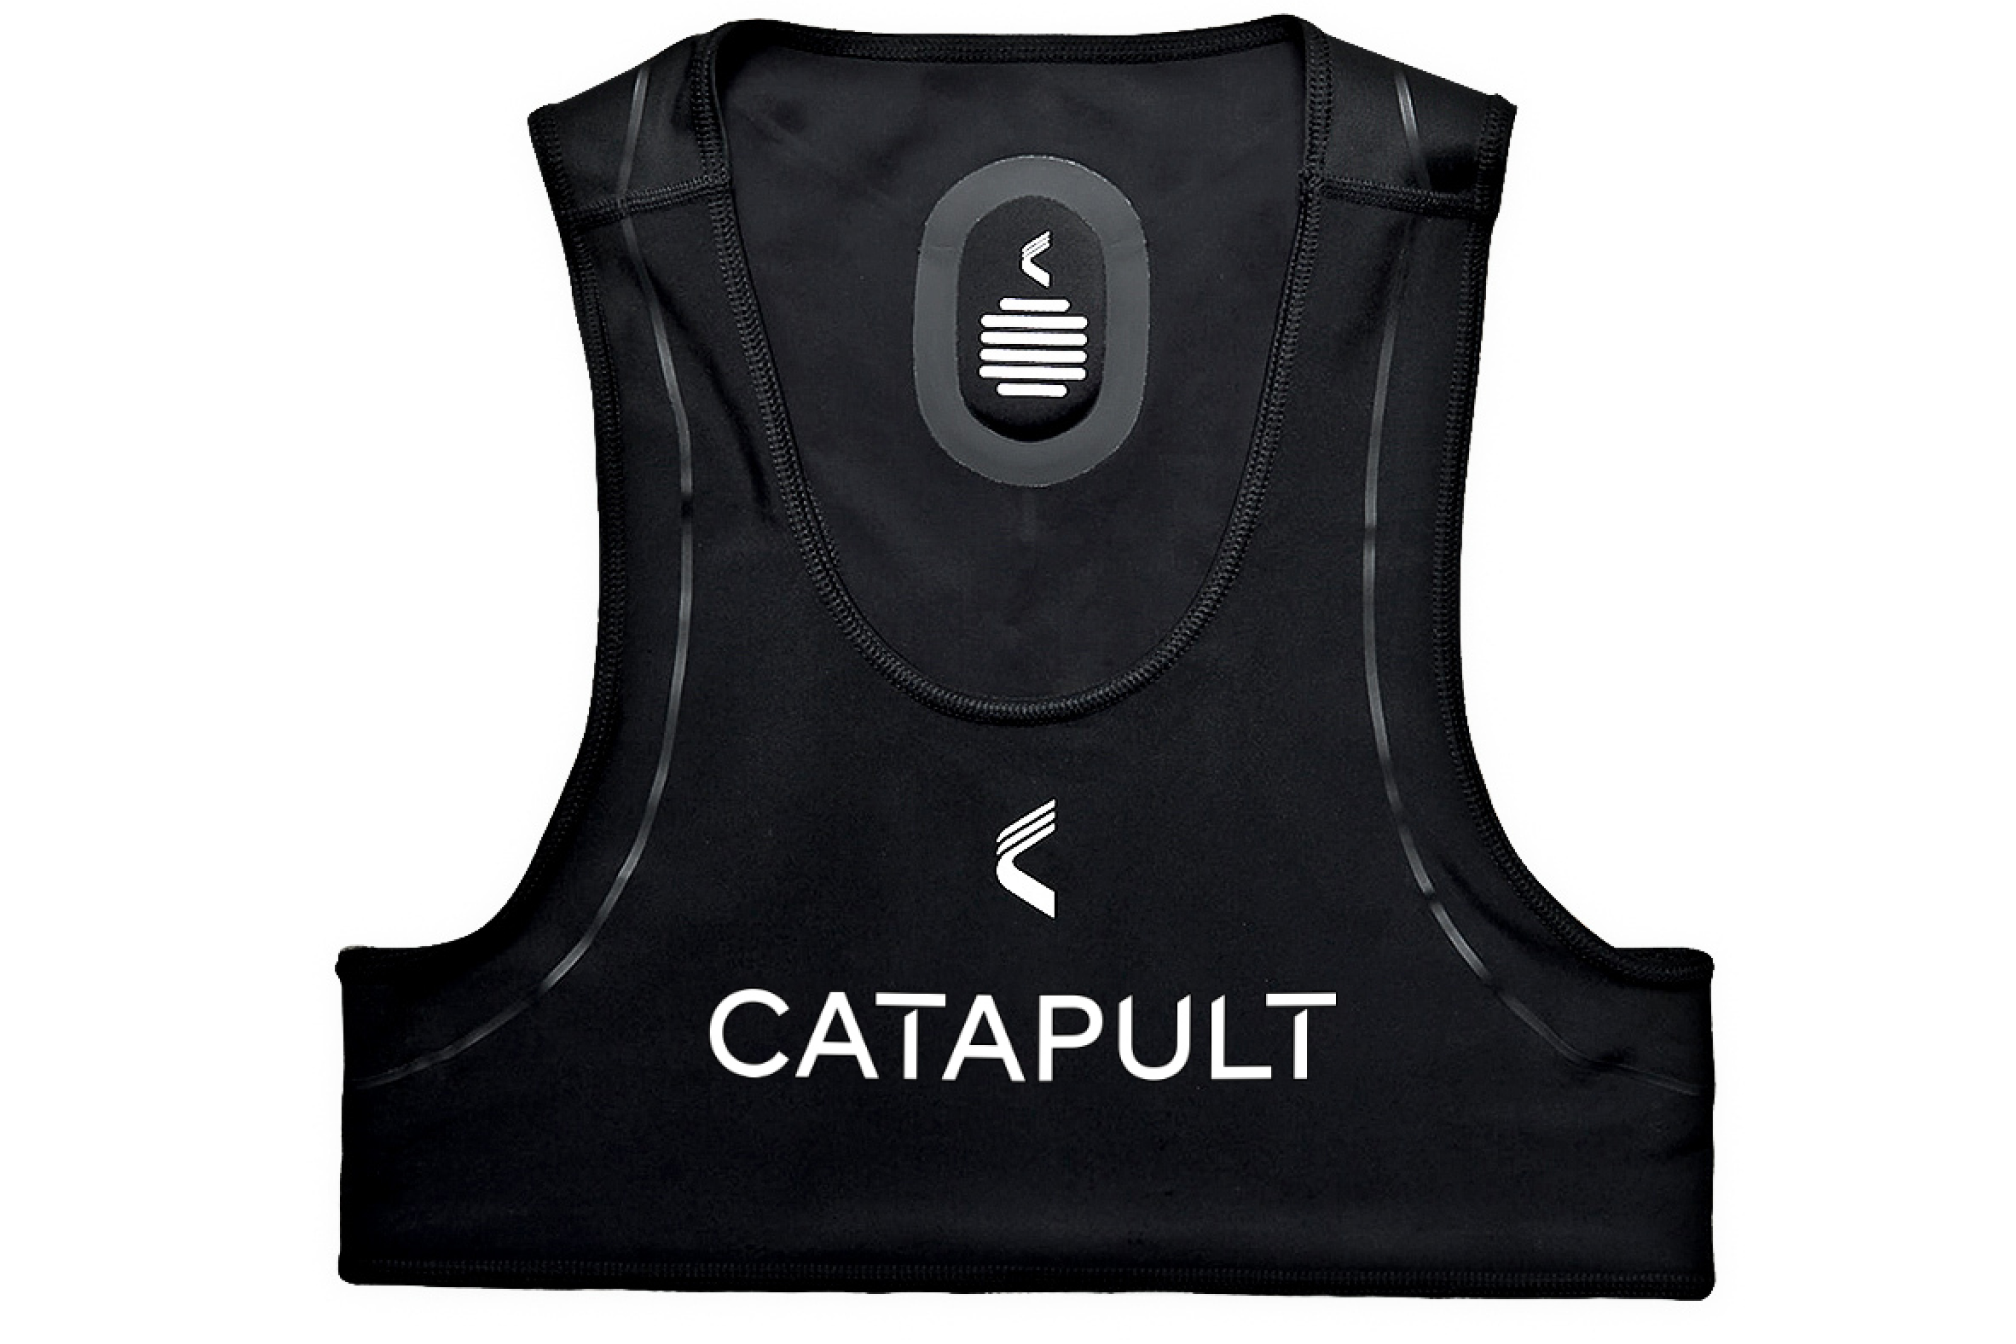 Why do Football Players wear GPS vests? - Catapult One